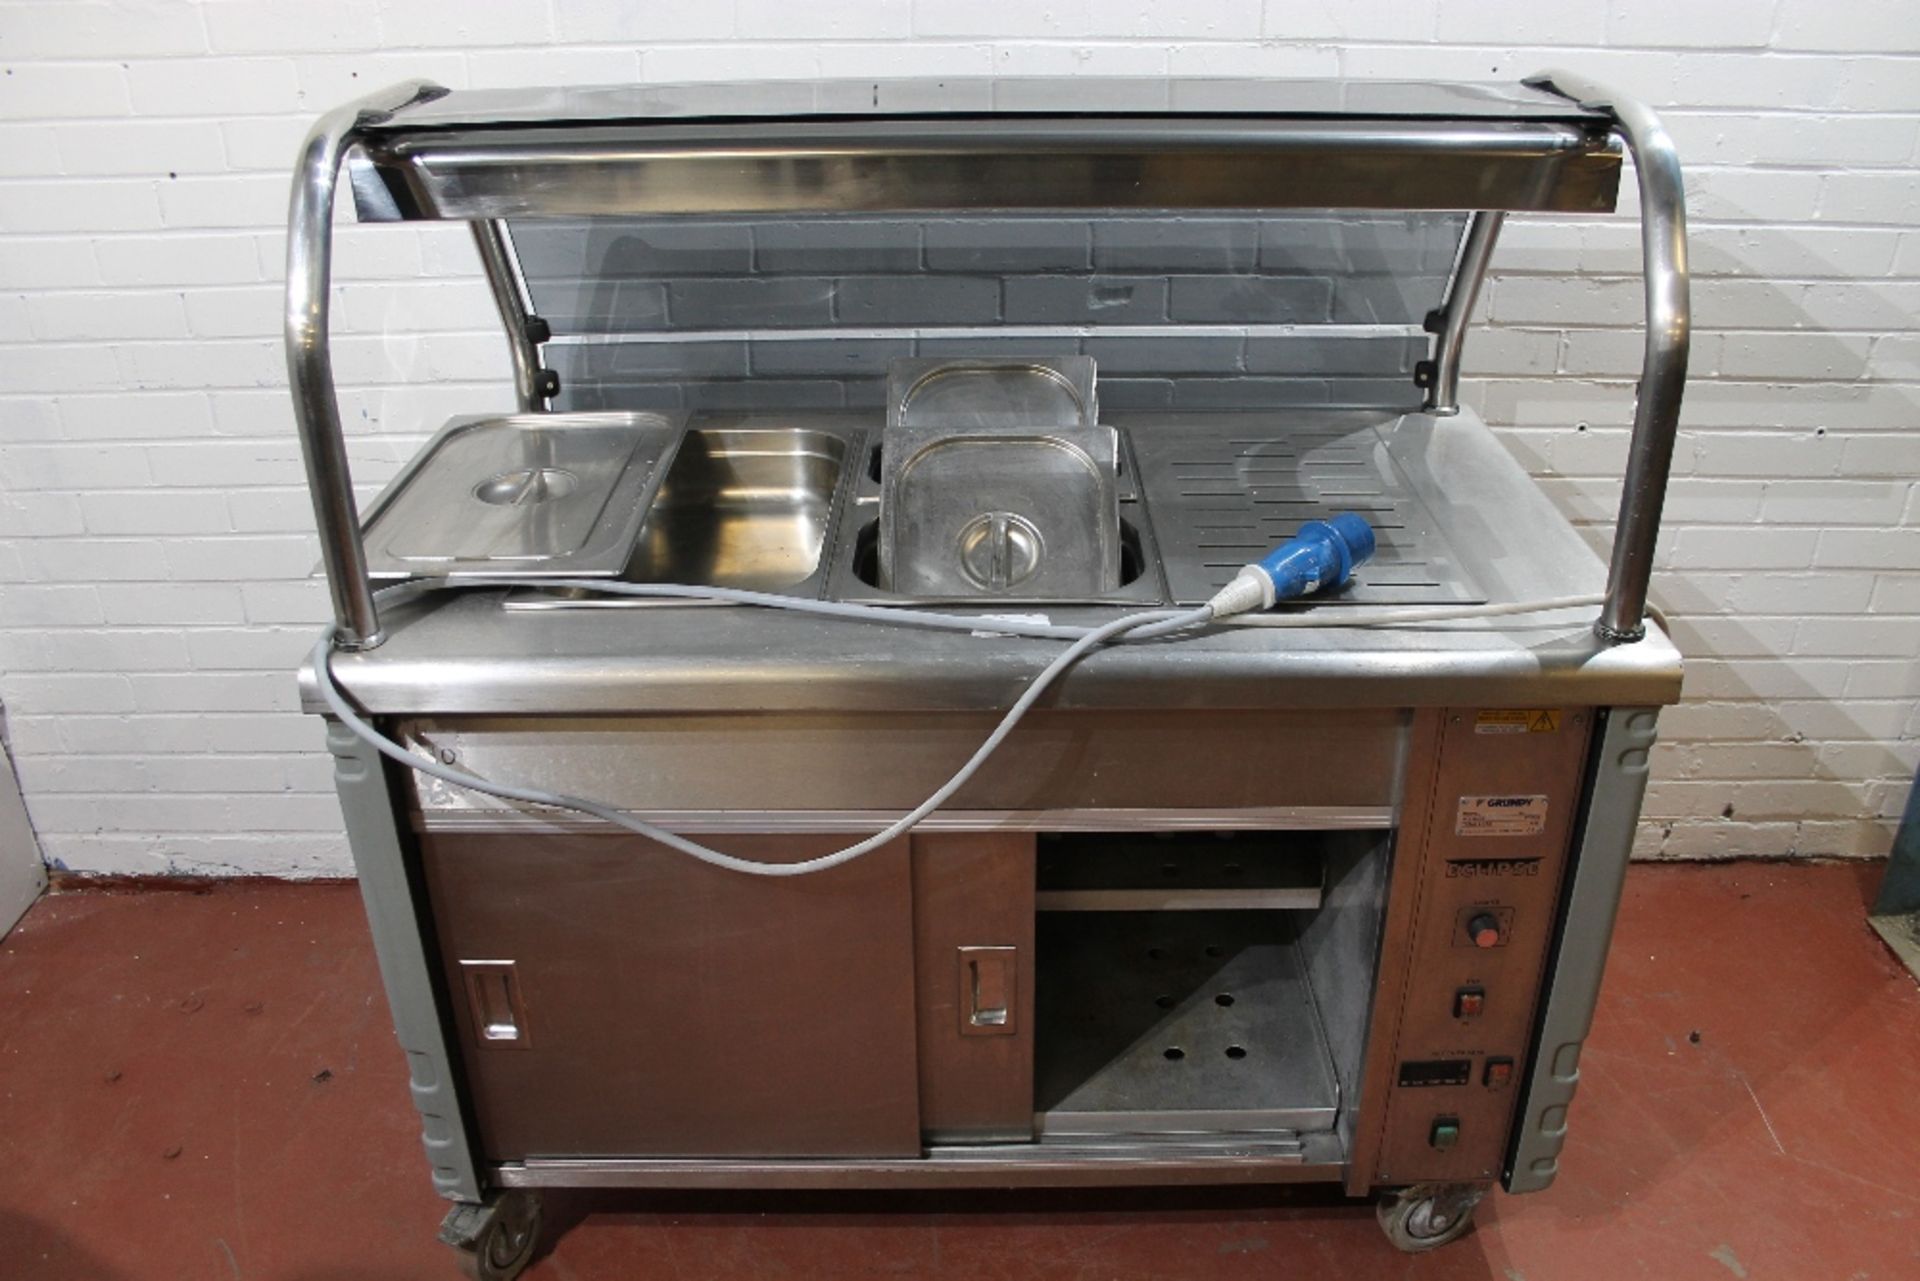 Grundy Mobile Bain Marie / Hot Food Servery with Gastro Pans – Model 91303 R11 – 3ph- Tested - Image 3 of 3